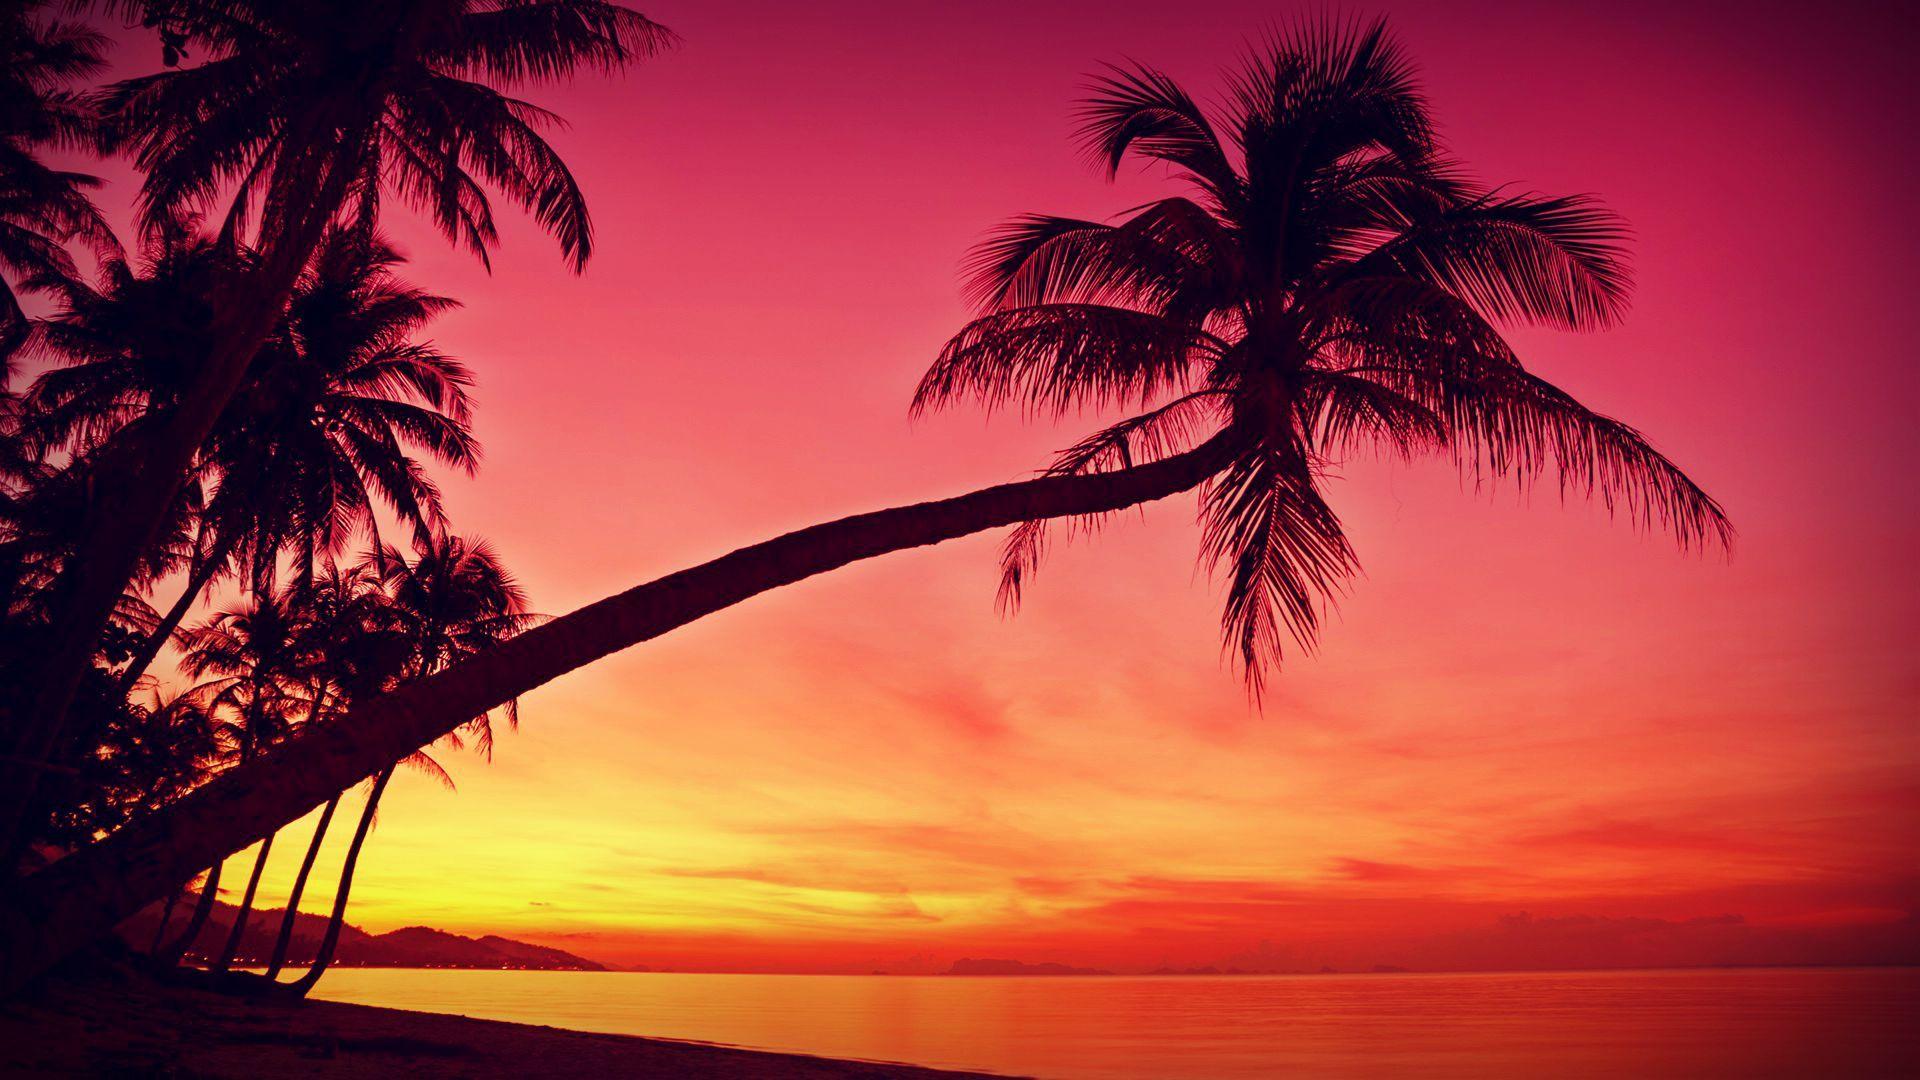 HD Tropical, Sunset, Palm Trees, Silhouette, Beach Wallpapers